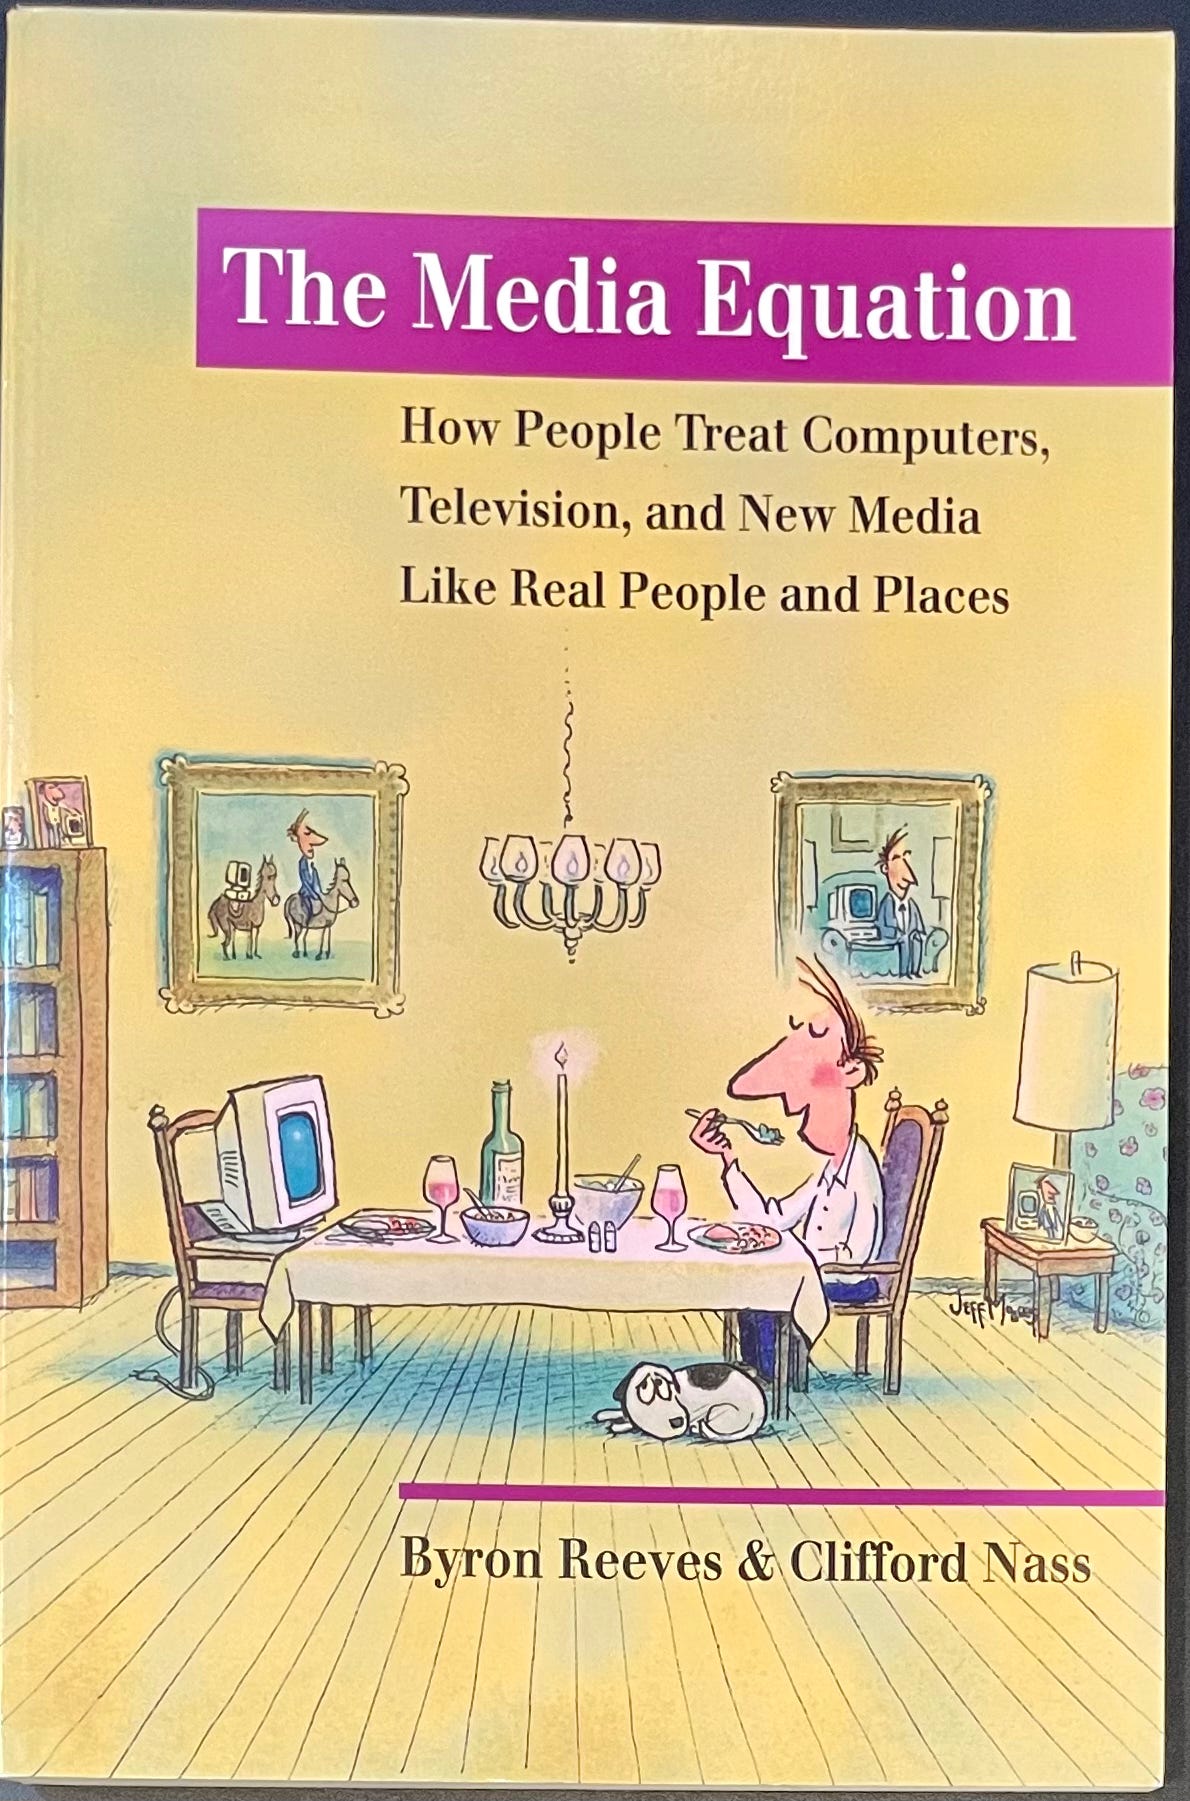 The Media Equation by Byron Reeves and Clifford Nass